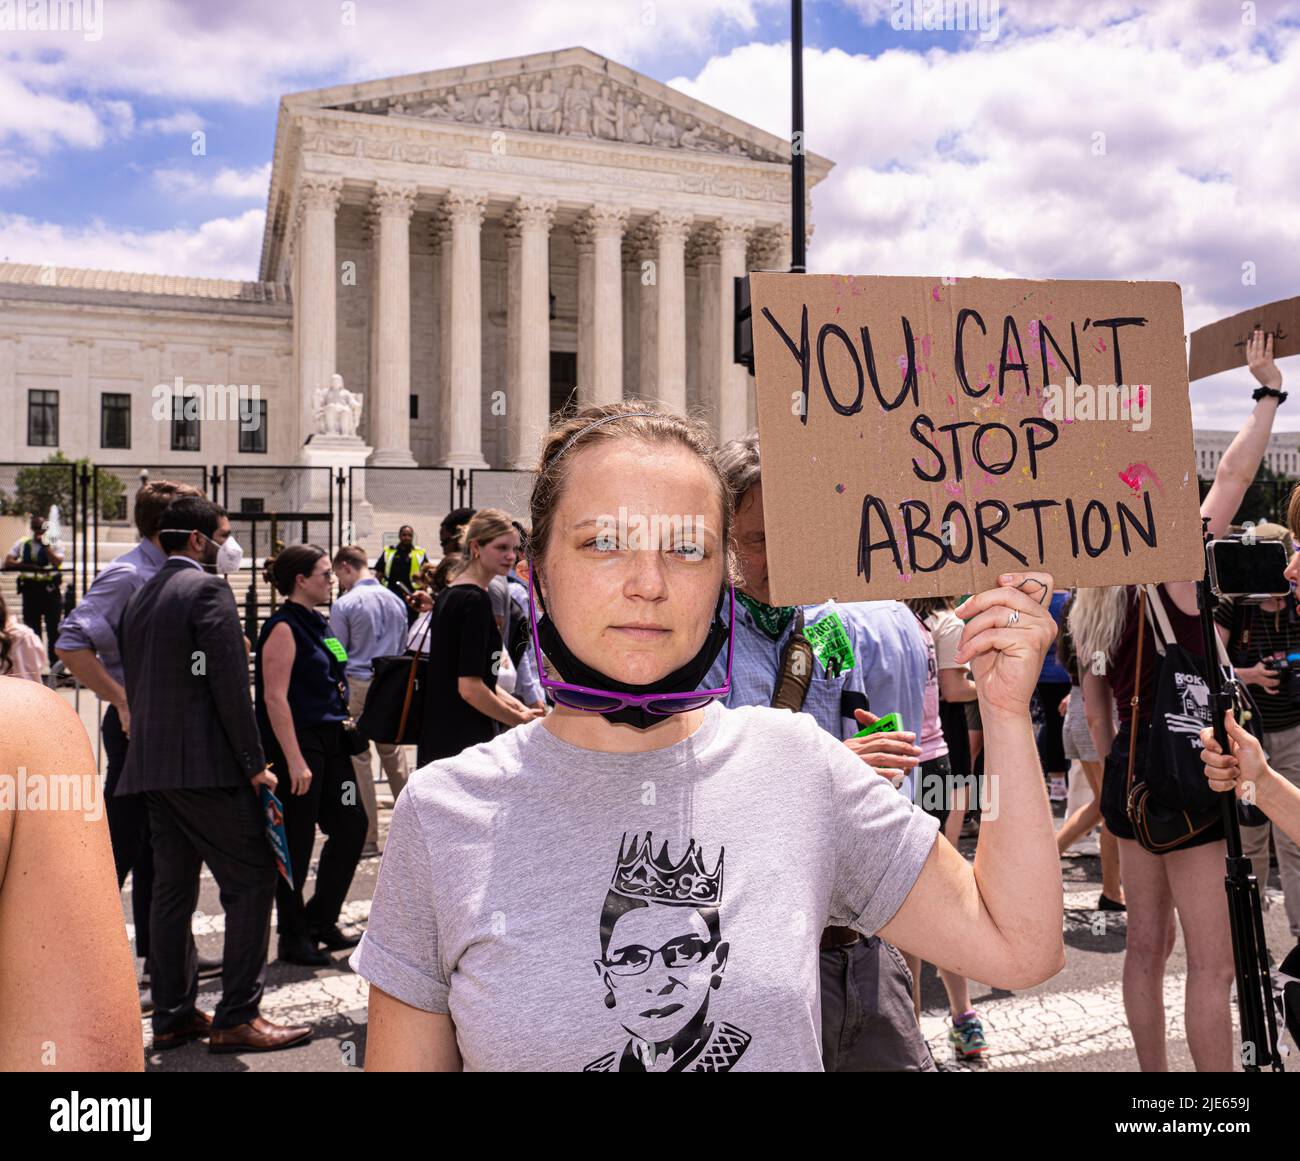 Washington, United States Of America. 24th June, 2022. 'You can't stop abortion' reads the sign. Demonstrators assembled in front of the U.S. Supreme Court in Washington, DC on June 24, 2022 after it announced that it had eliminated the constitutional right to an abortion, overruling the 1973 Roe v. Wade decision, thereby leaving the question of abortion up to the states. (Photo by Jeff Malet). Photo via Credit: Newscom/Alamy Live News Stock Photo